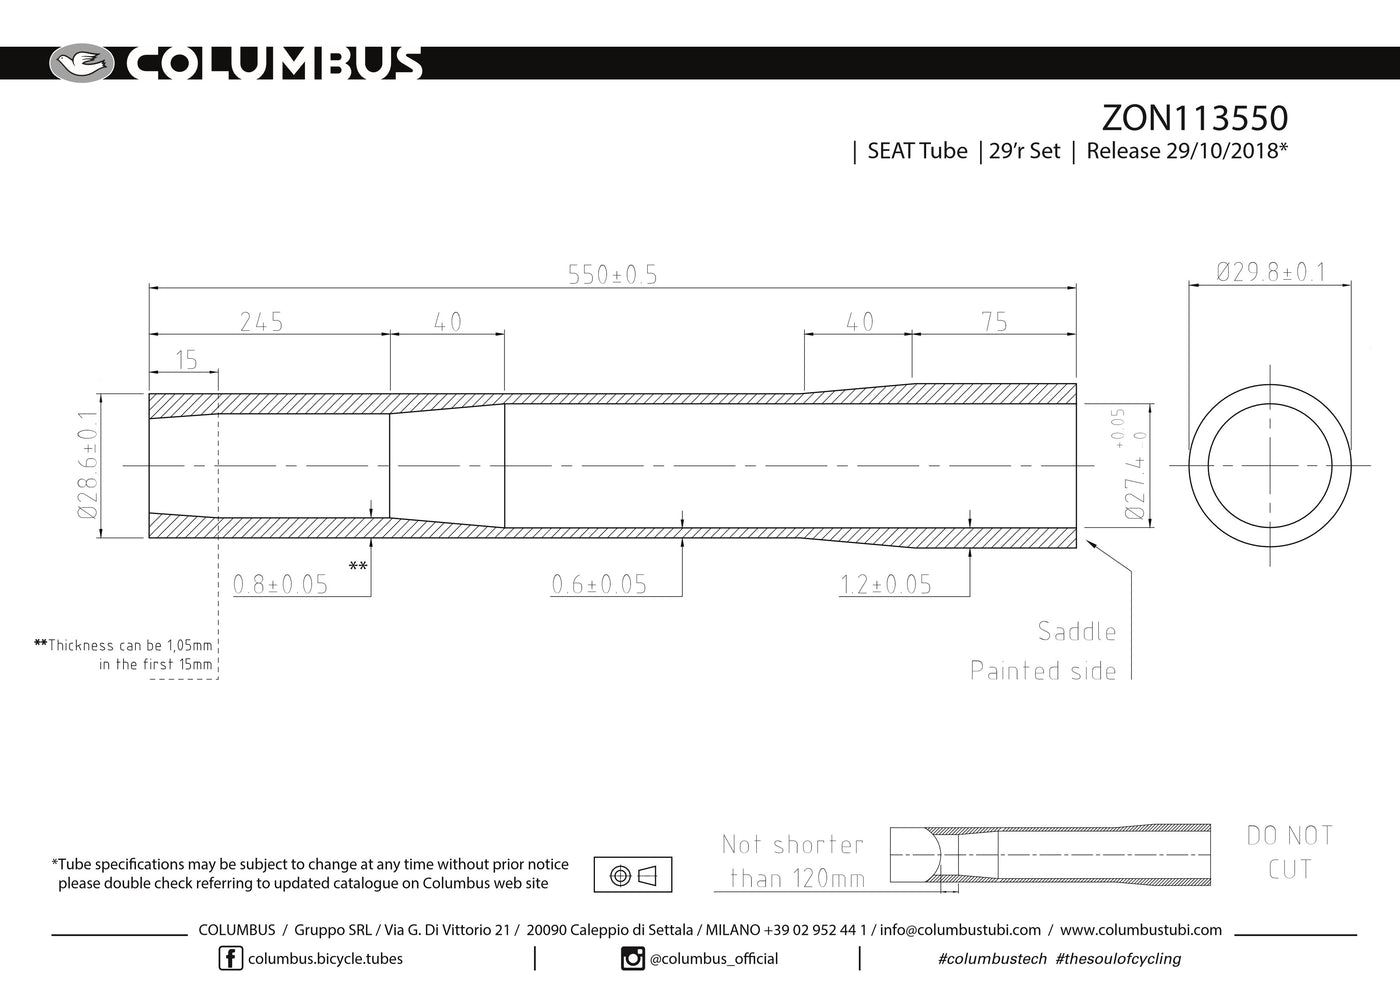 ZON113550  Columbus Tubing Zona 29er externally butted seat tube - 28.6 dia. - .8/.6/1.2 wall thickness. Length = 550